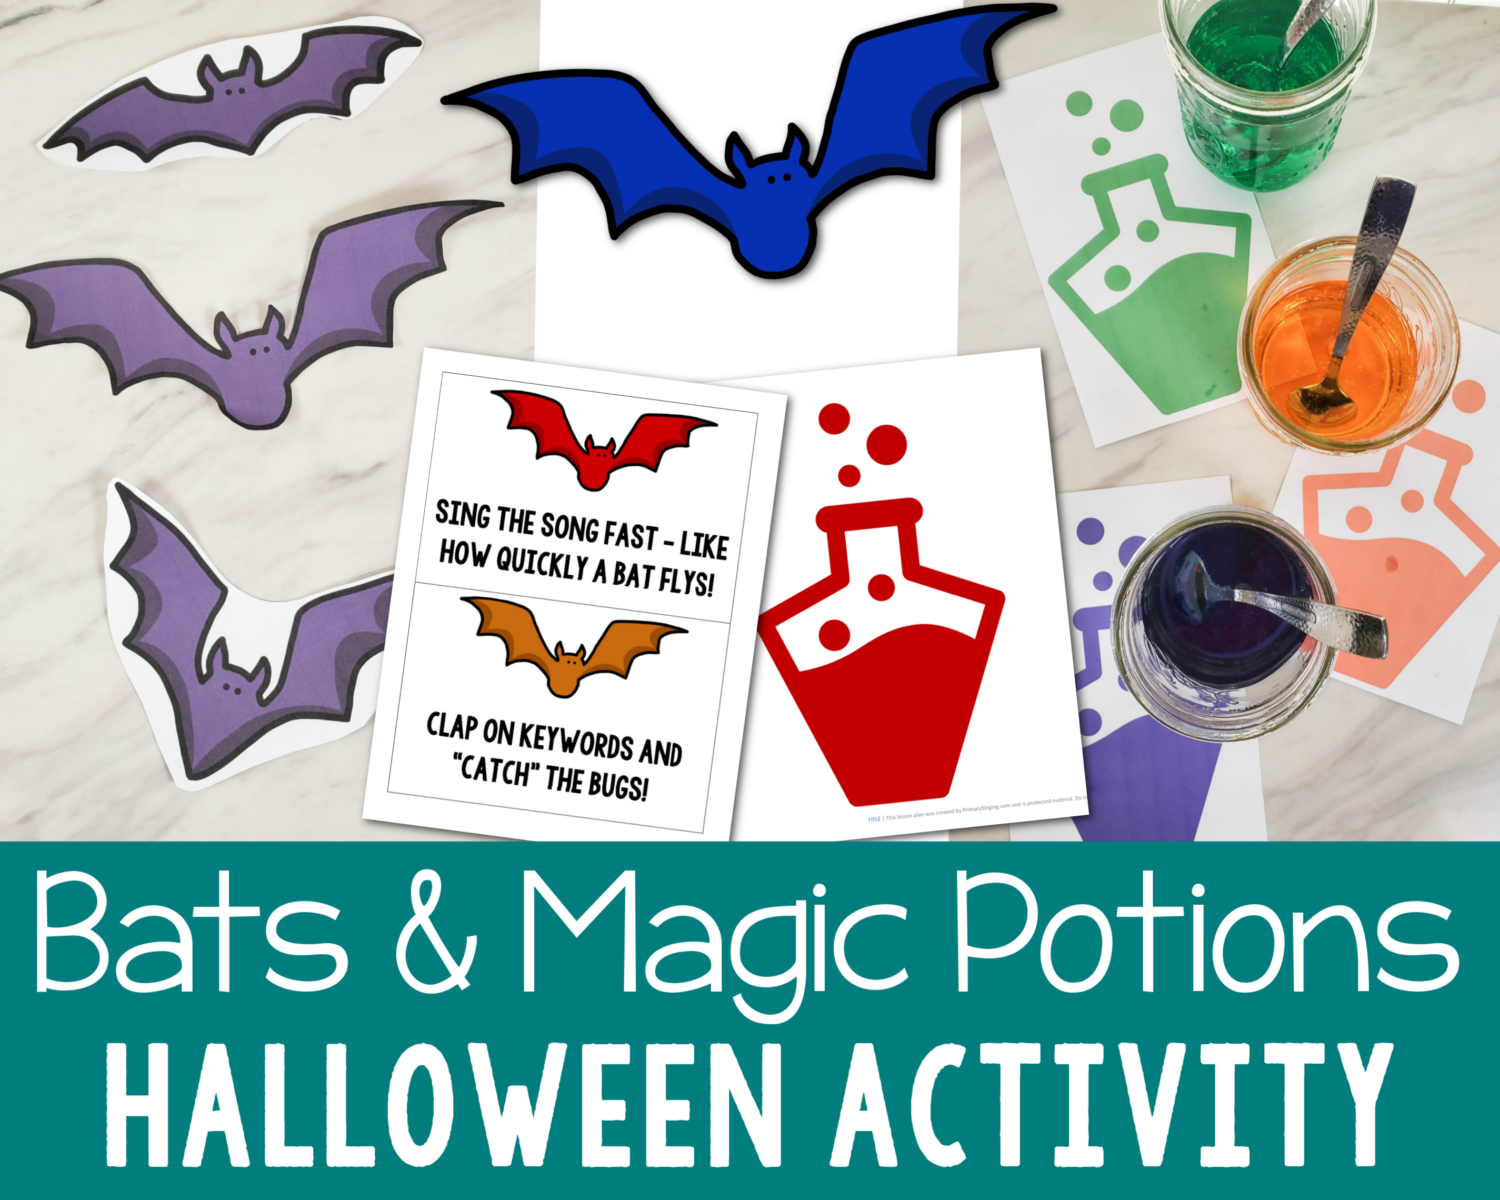 Halloween Bats & Magic Potions 2 for 1 singing time packet! You'll find 2 fun singing time ideas to use to teach a variety of different songs with a fun Halloween theme.